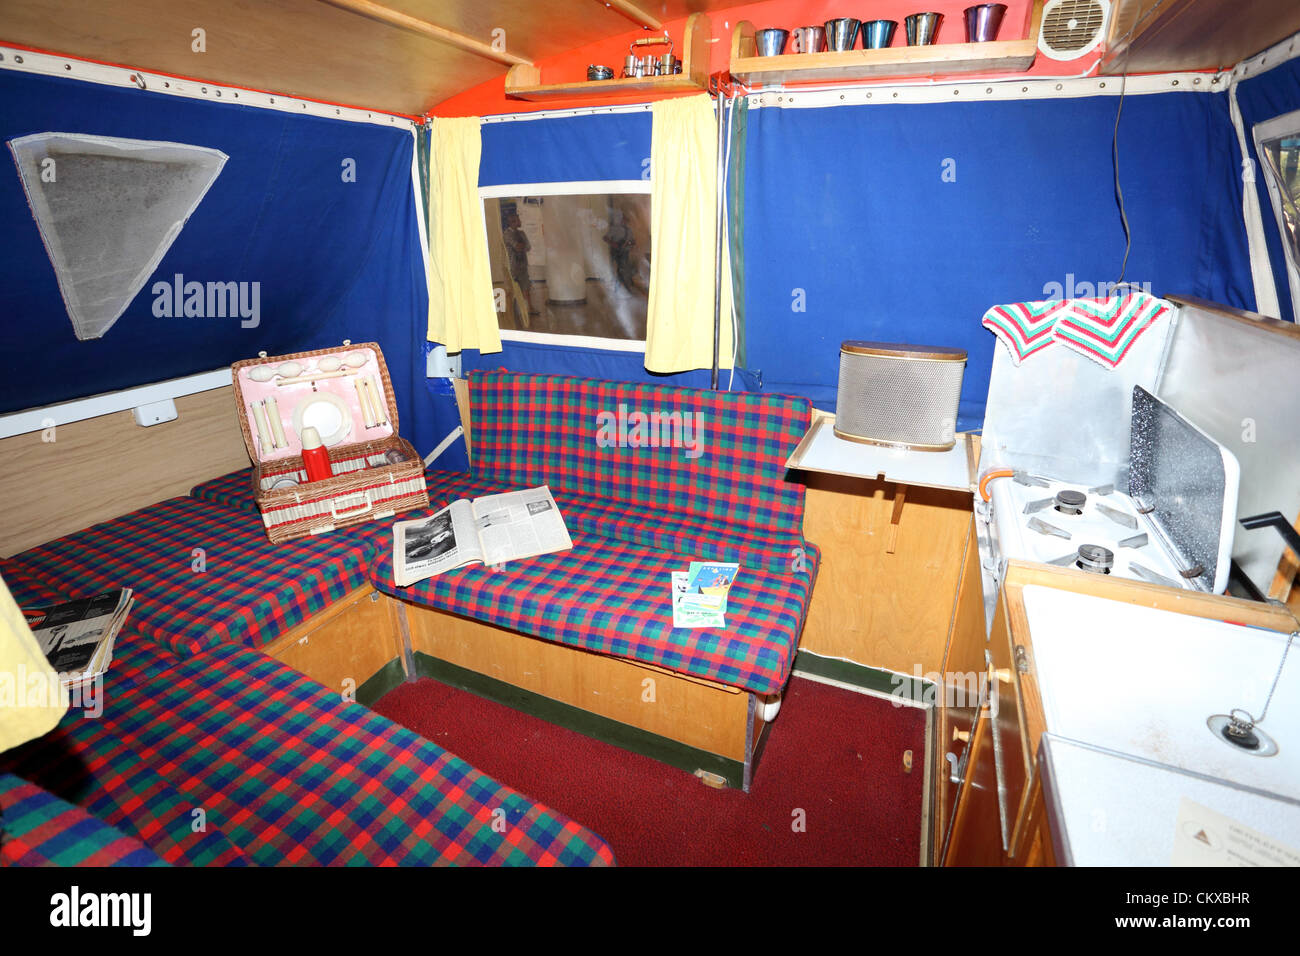 DUESSELDORF - AUGUST 27: Interior of the old Dethleffs Camper mobile home showed at the Caravan Salon Exhibition 2012 on August 27, 2012 in Düsseldorf, Germany. Stock Photo